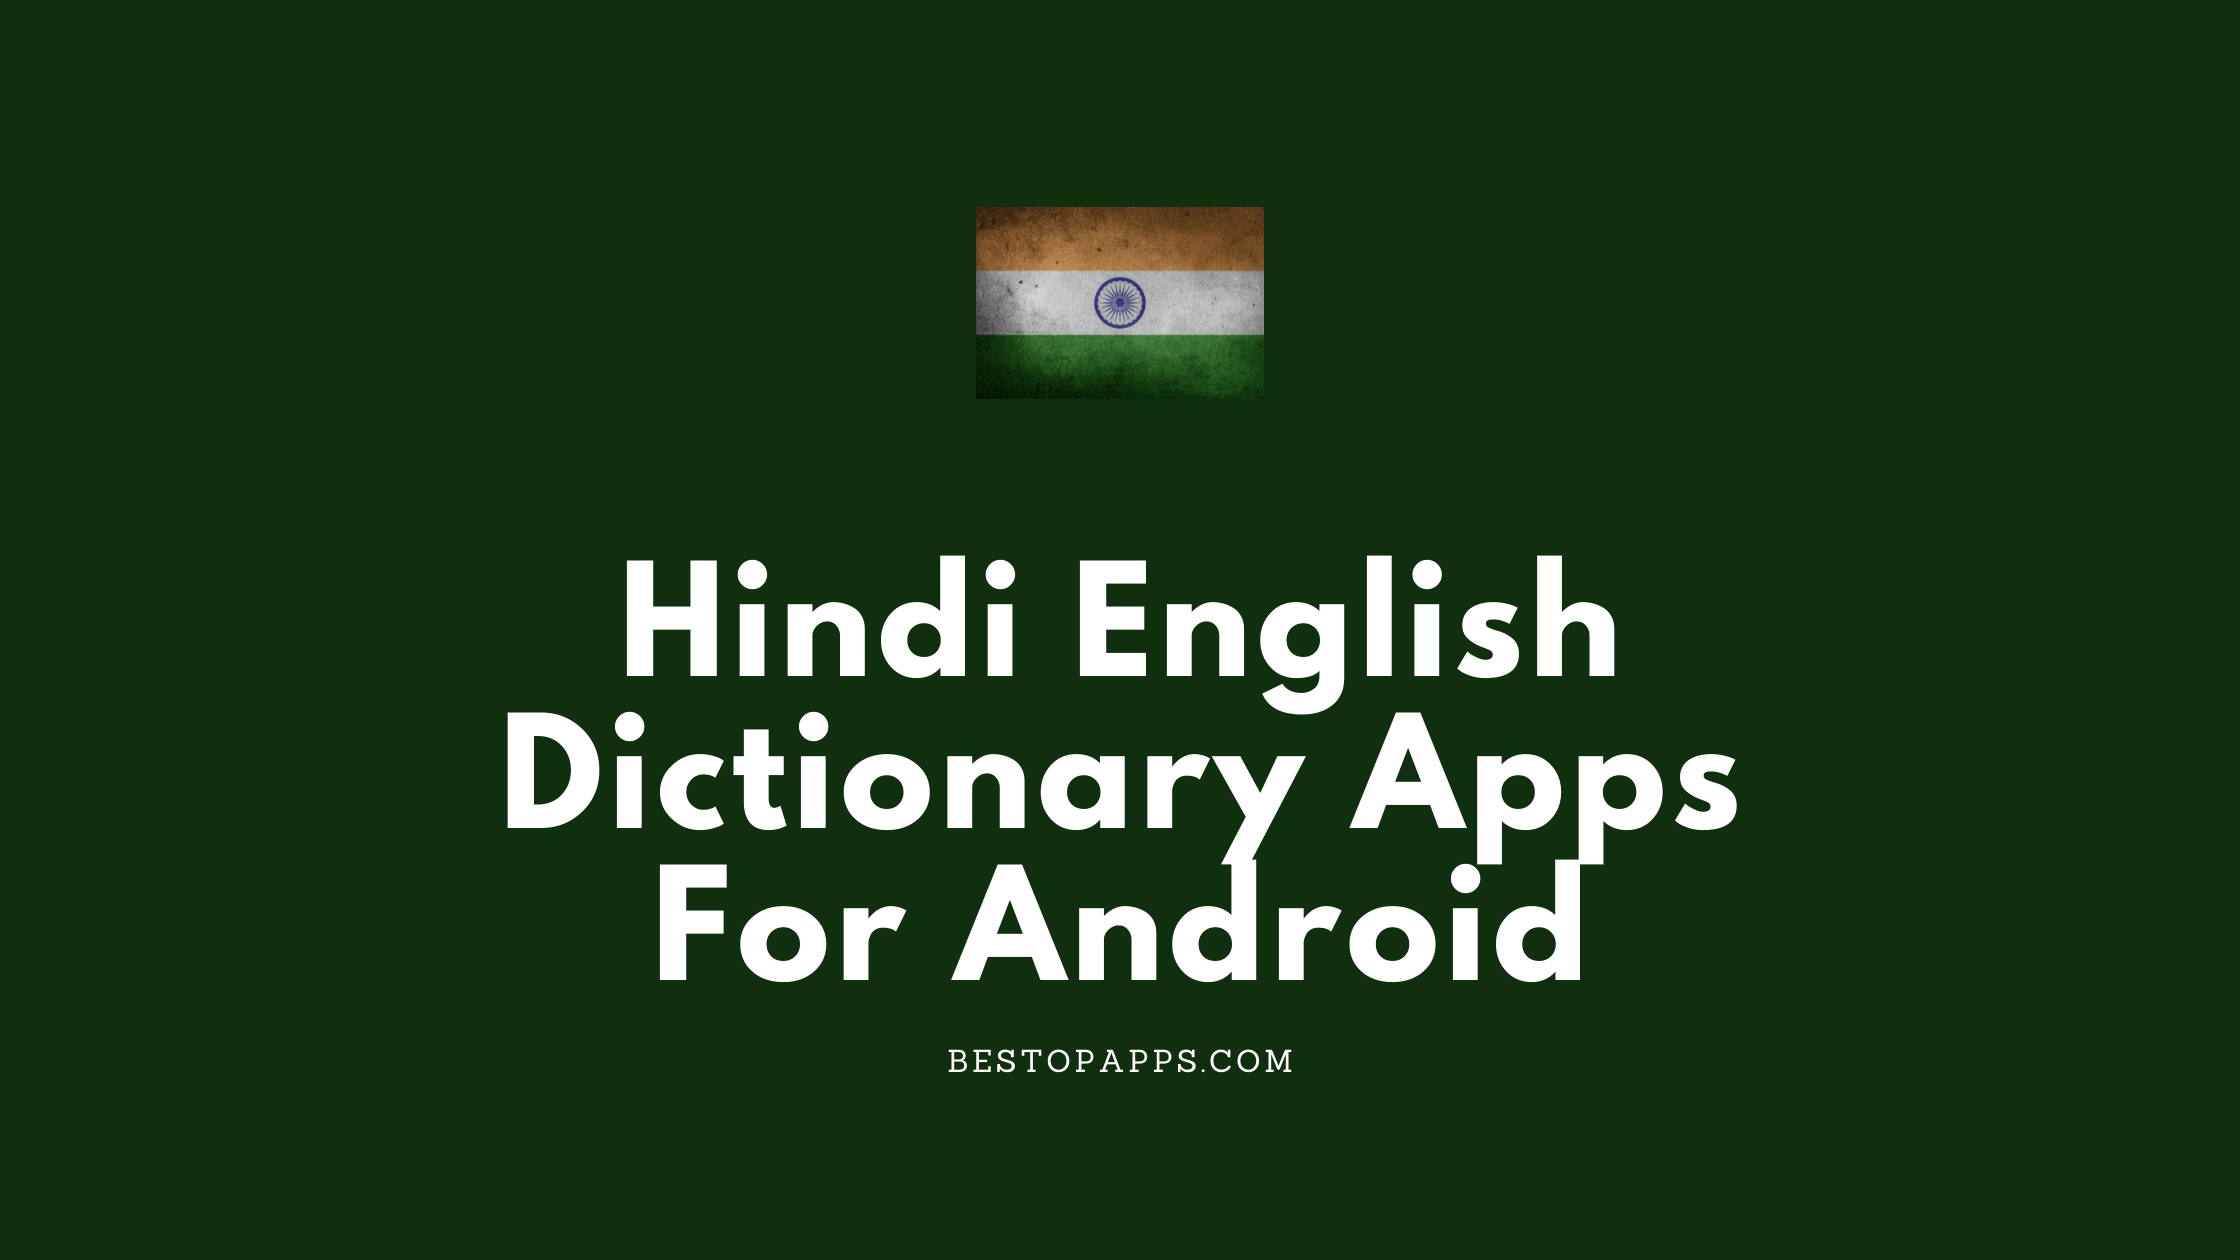 Hindi English Dictionary Apps For Android